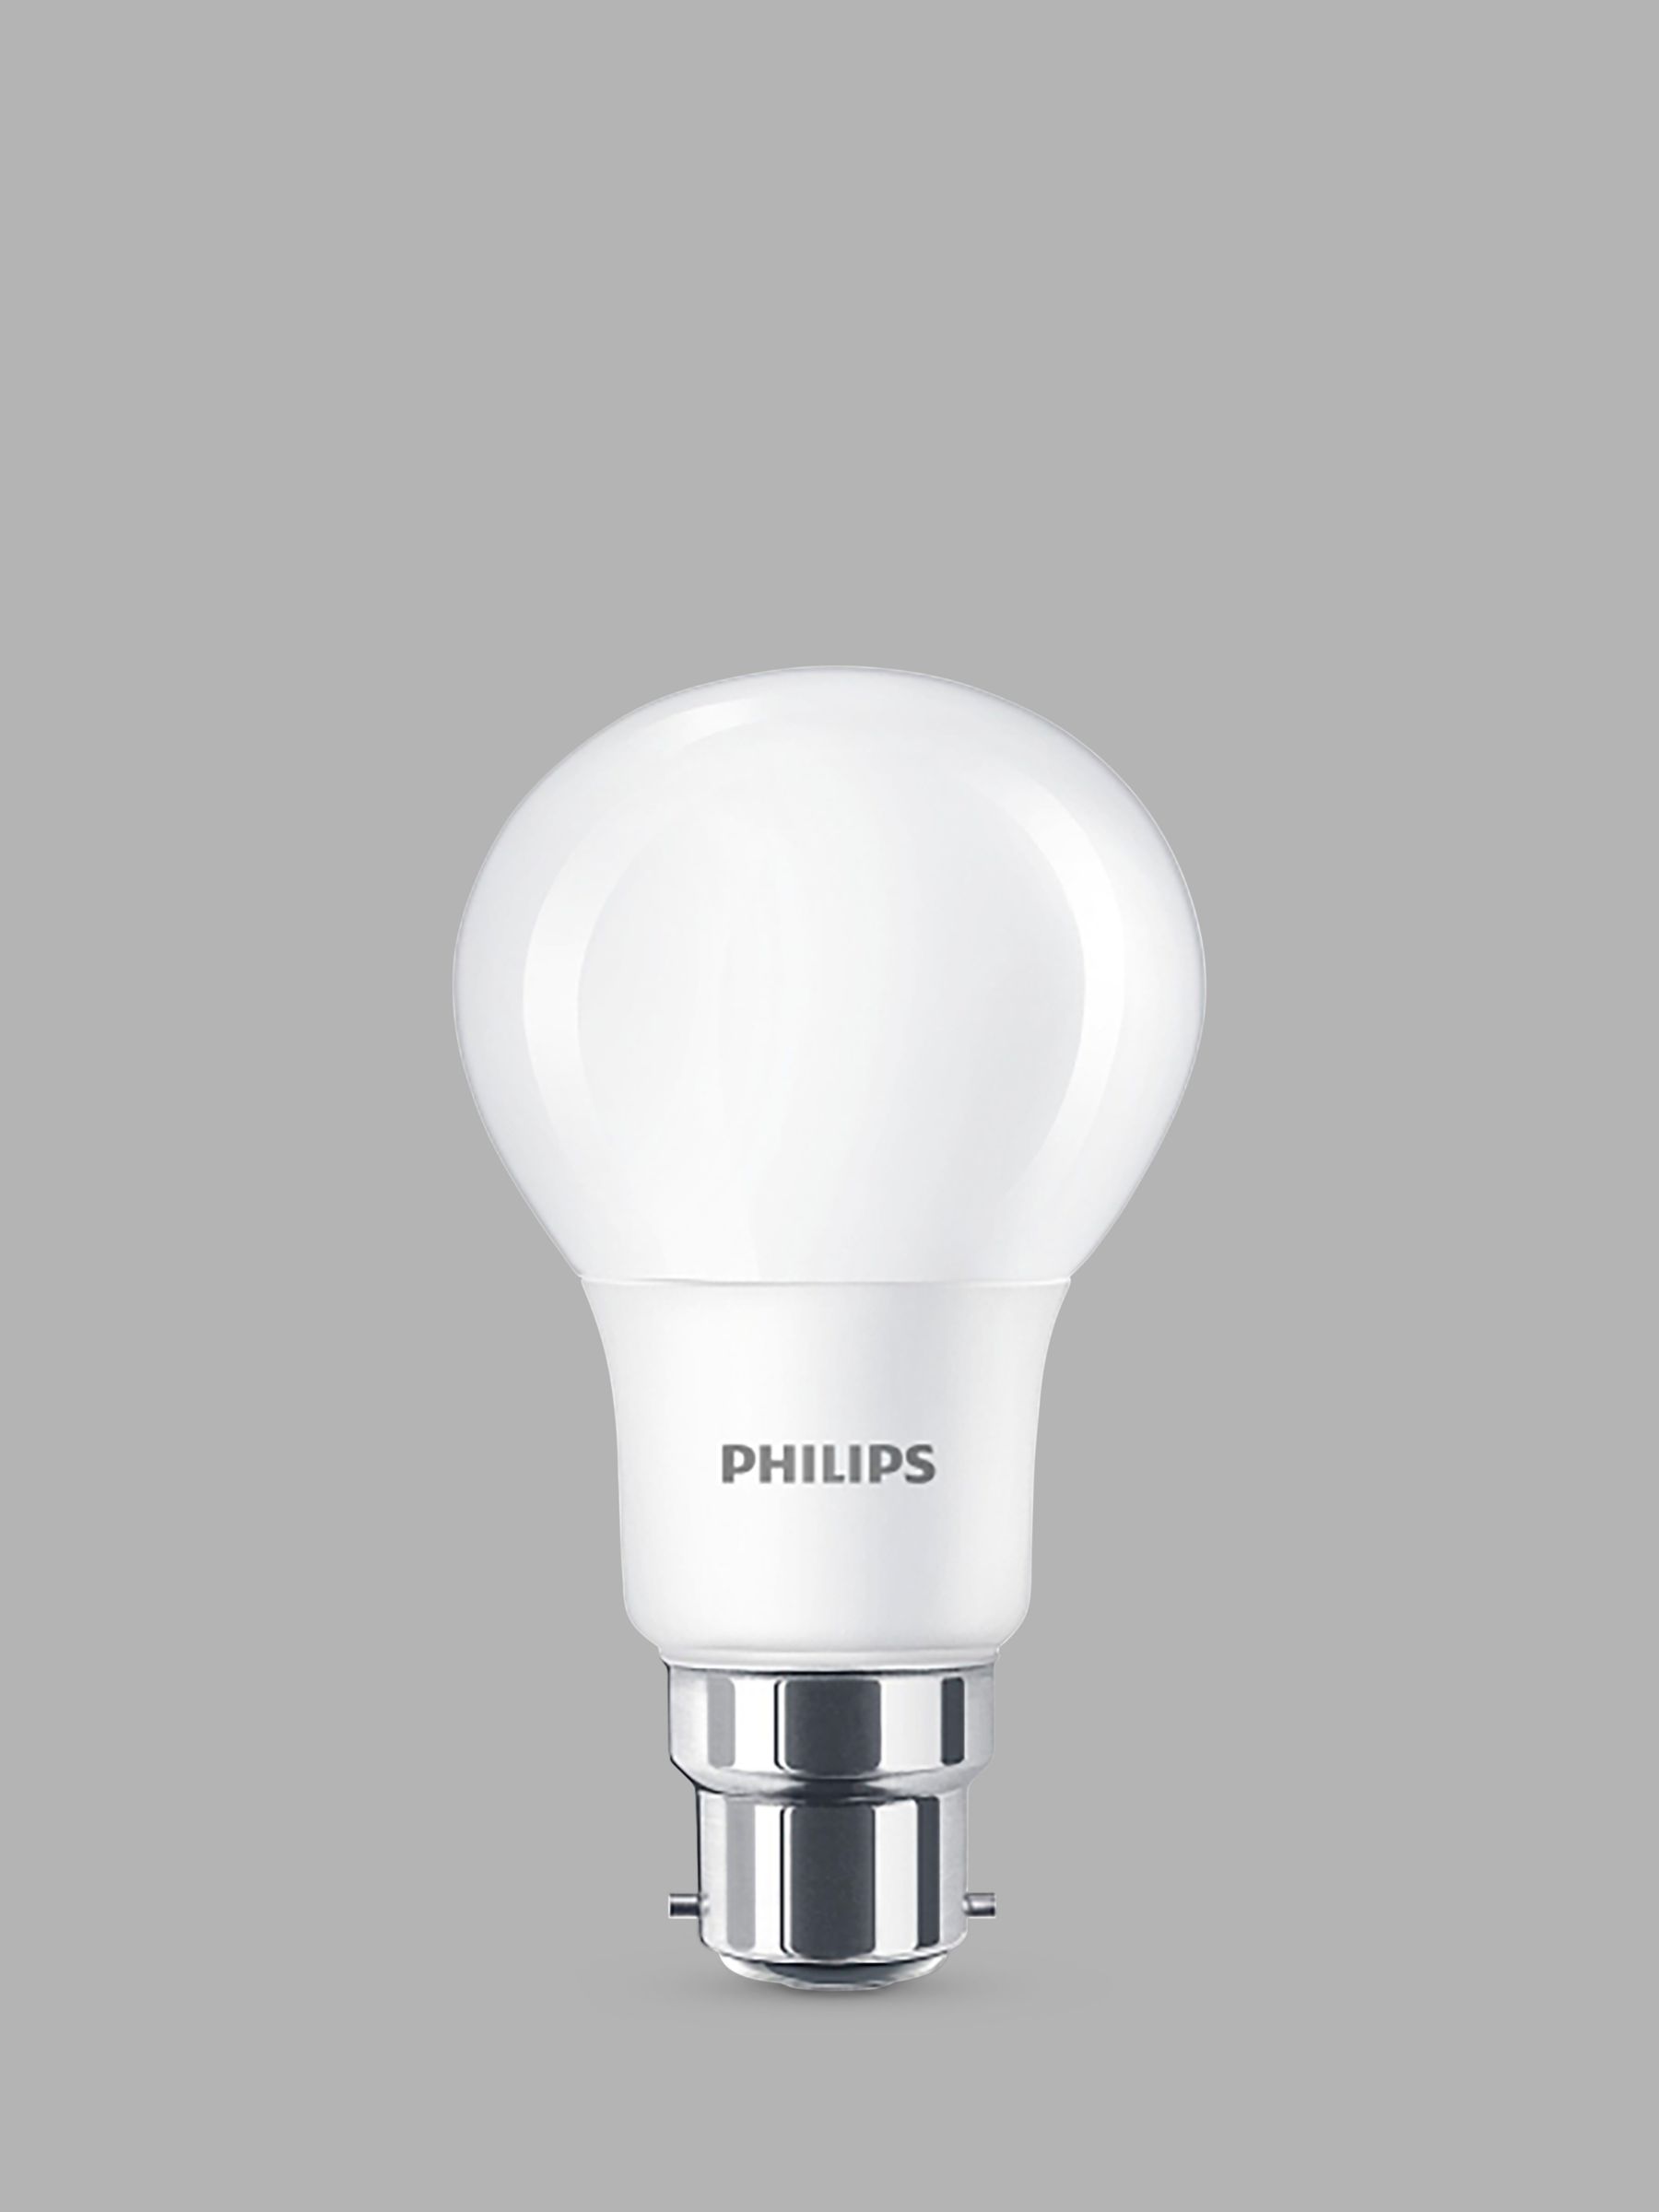 Photo of Philips 8w bc classic led warm white light bulb pack of 6